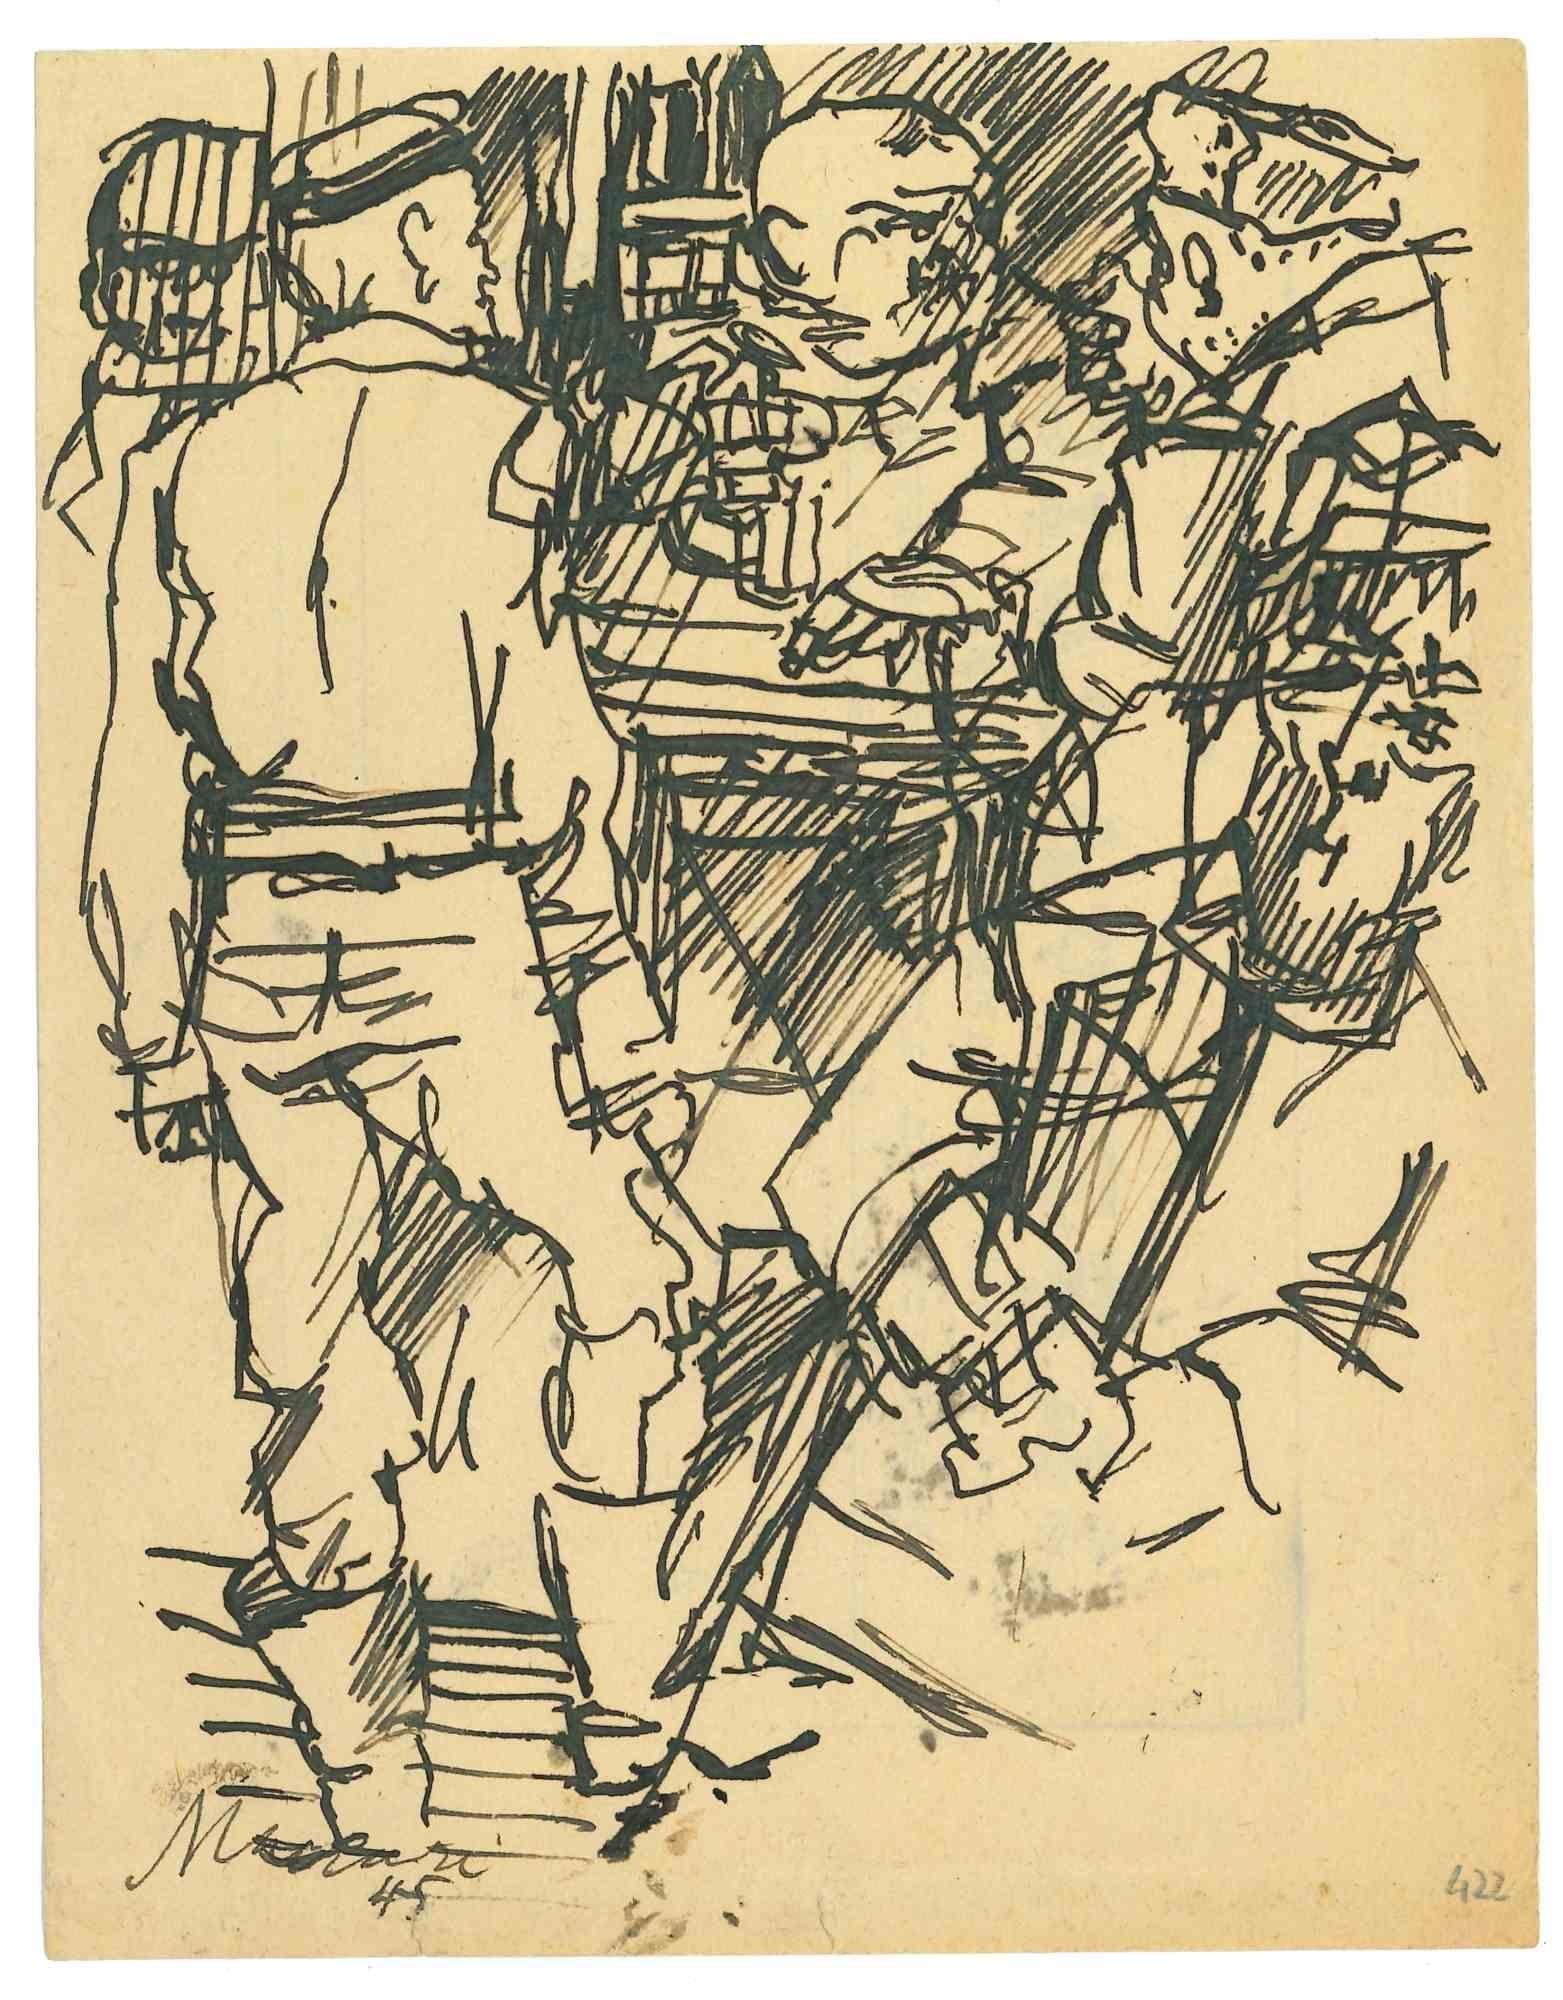 In the Bar is a China Ink Drawing realized by Mino Maccari  (1924-1989) in the 1945 ca.

Hand-signed on the lower margin.

Good conditions with some folding.

Mino Maccari (Siena, 1924-Rome, June 16, 1989) was an Italian writer, painter, engraver